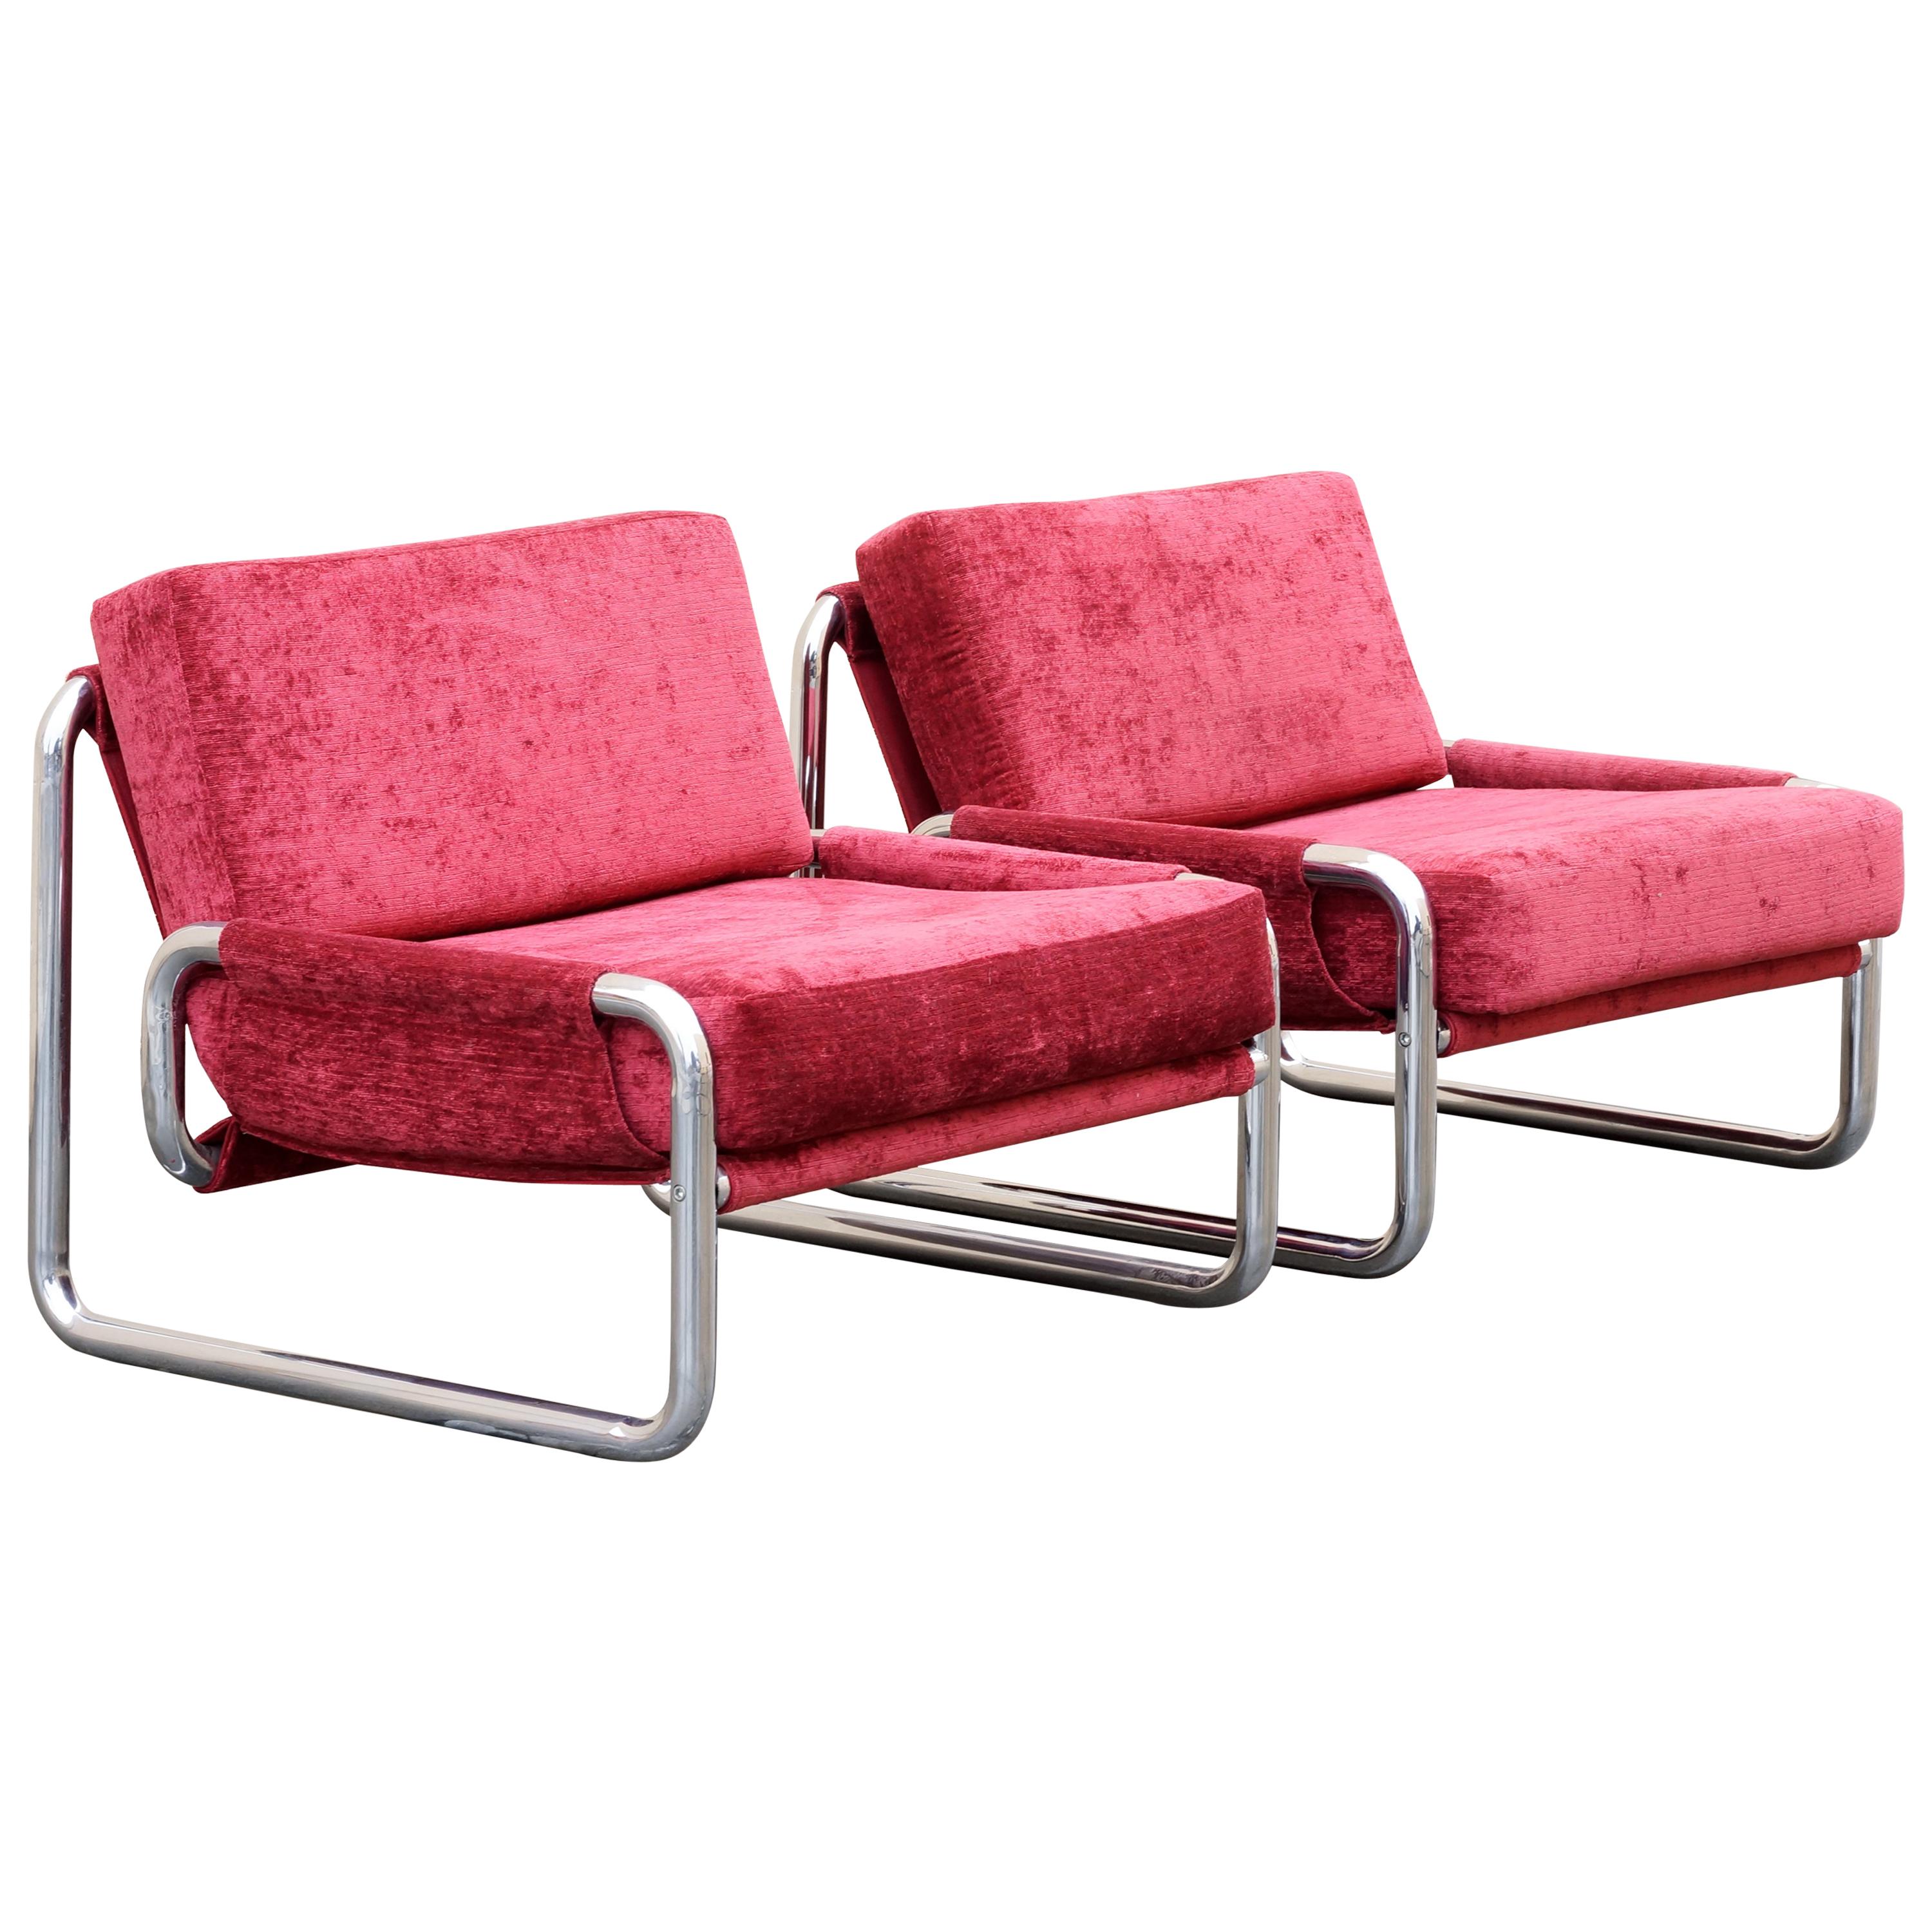 Pair of 1970s Chrome Lounge Chairs